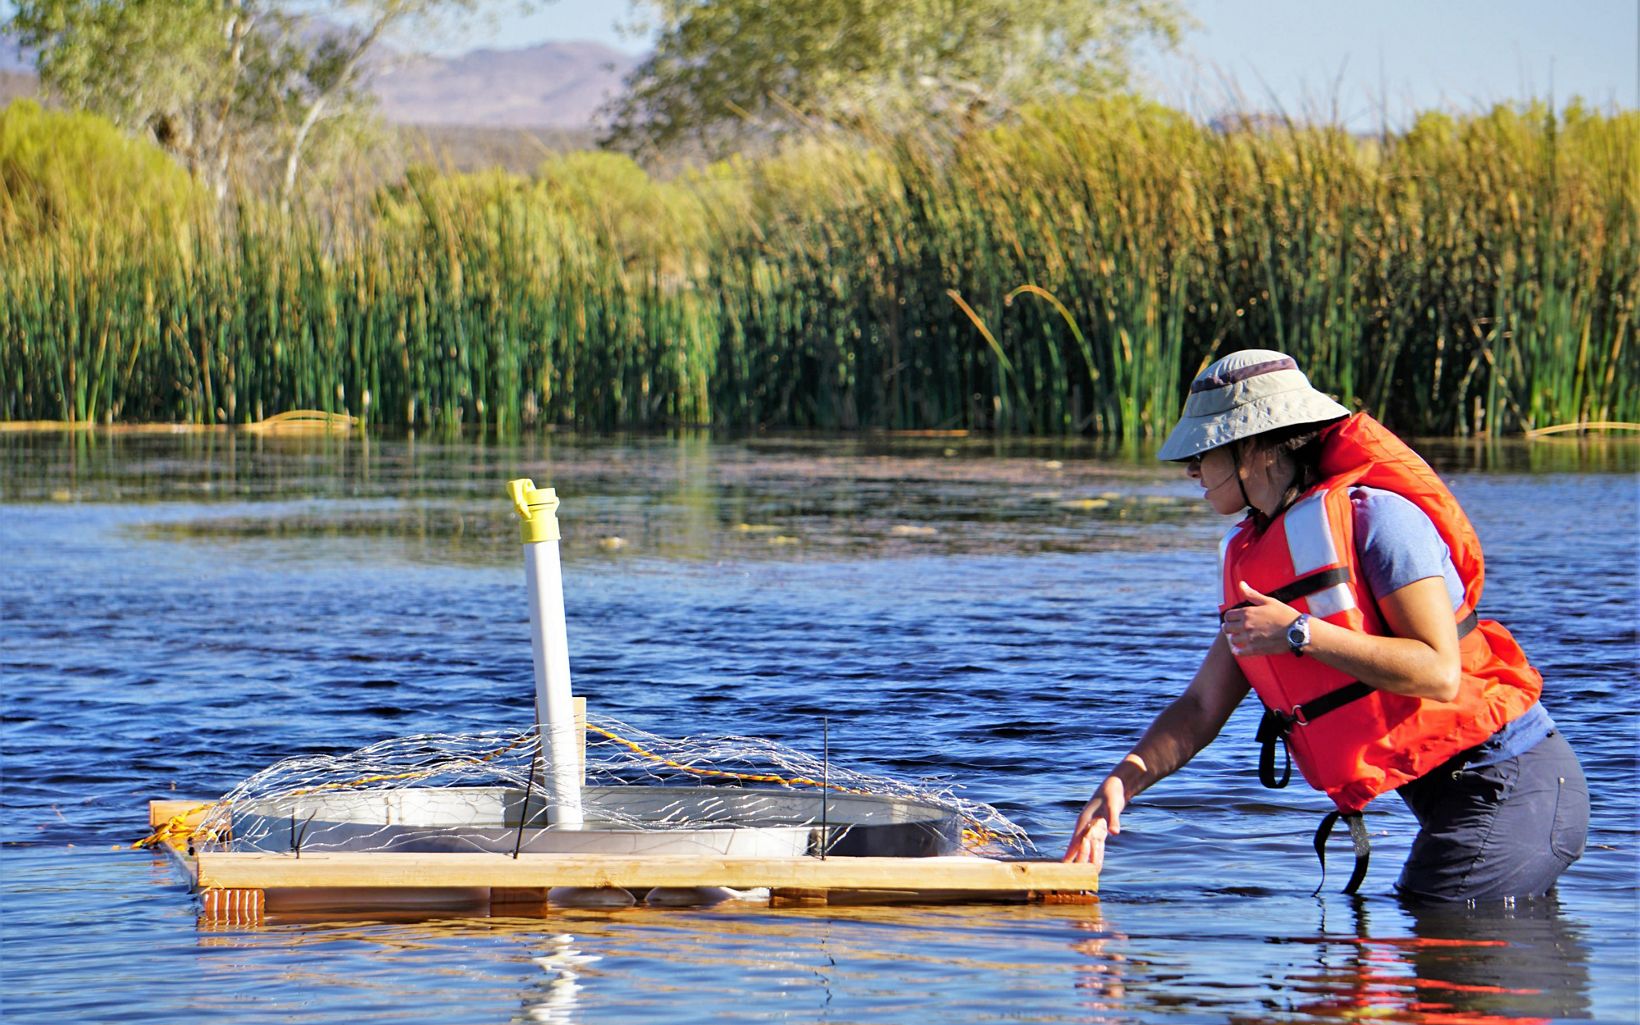 Studying hydrology DRI researcher Gabrielle Boisrame, Ph.D., inspects a floating evaporation pan at the headwaters of the Amargosa River. © Ali Swallow/Desert Research Institute